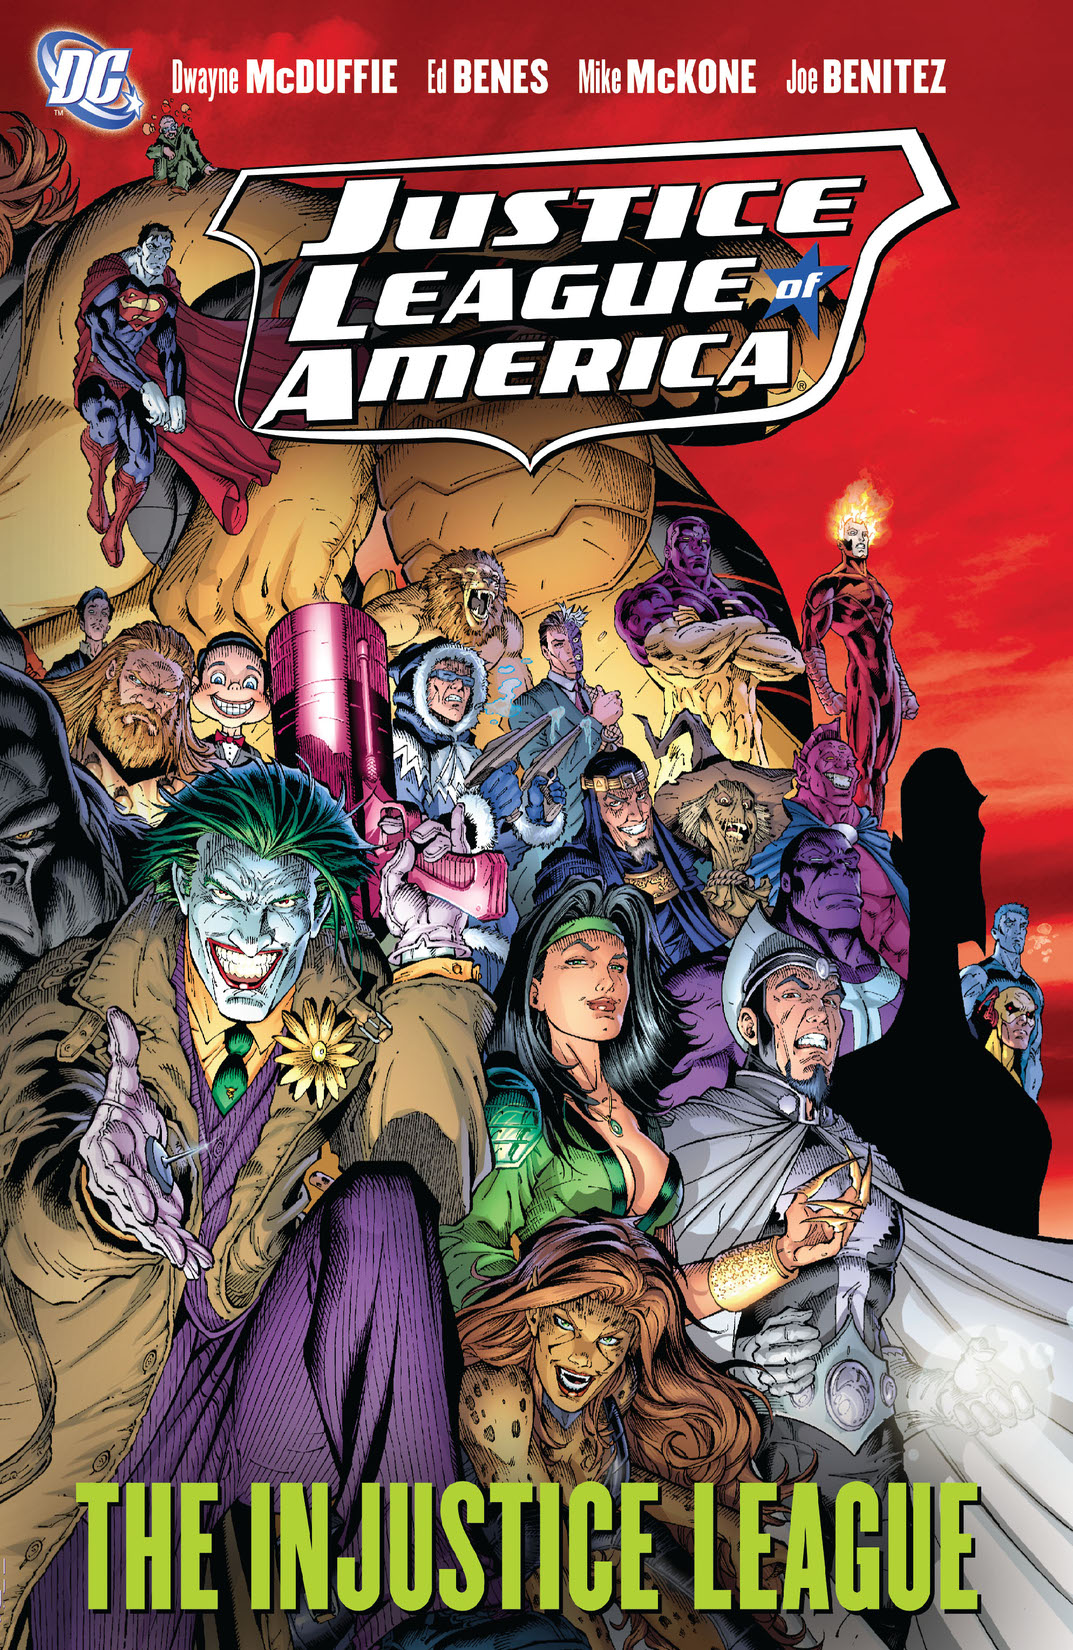 Justice League of America Vol 3: The Injustice League preview images